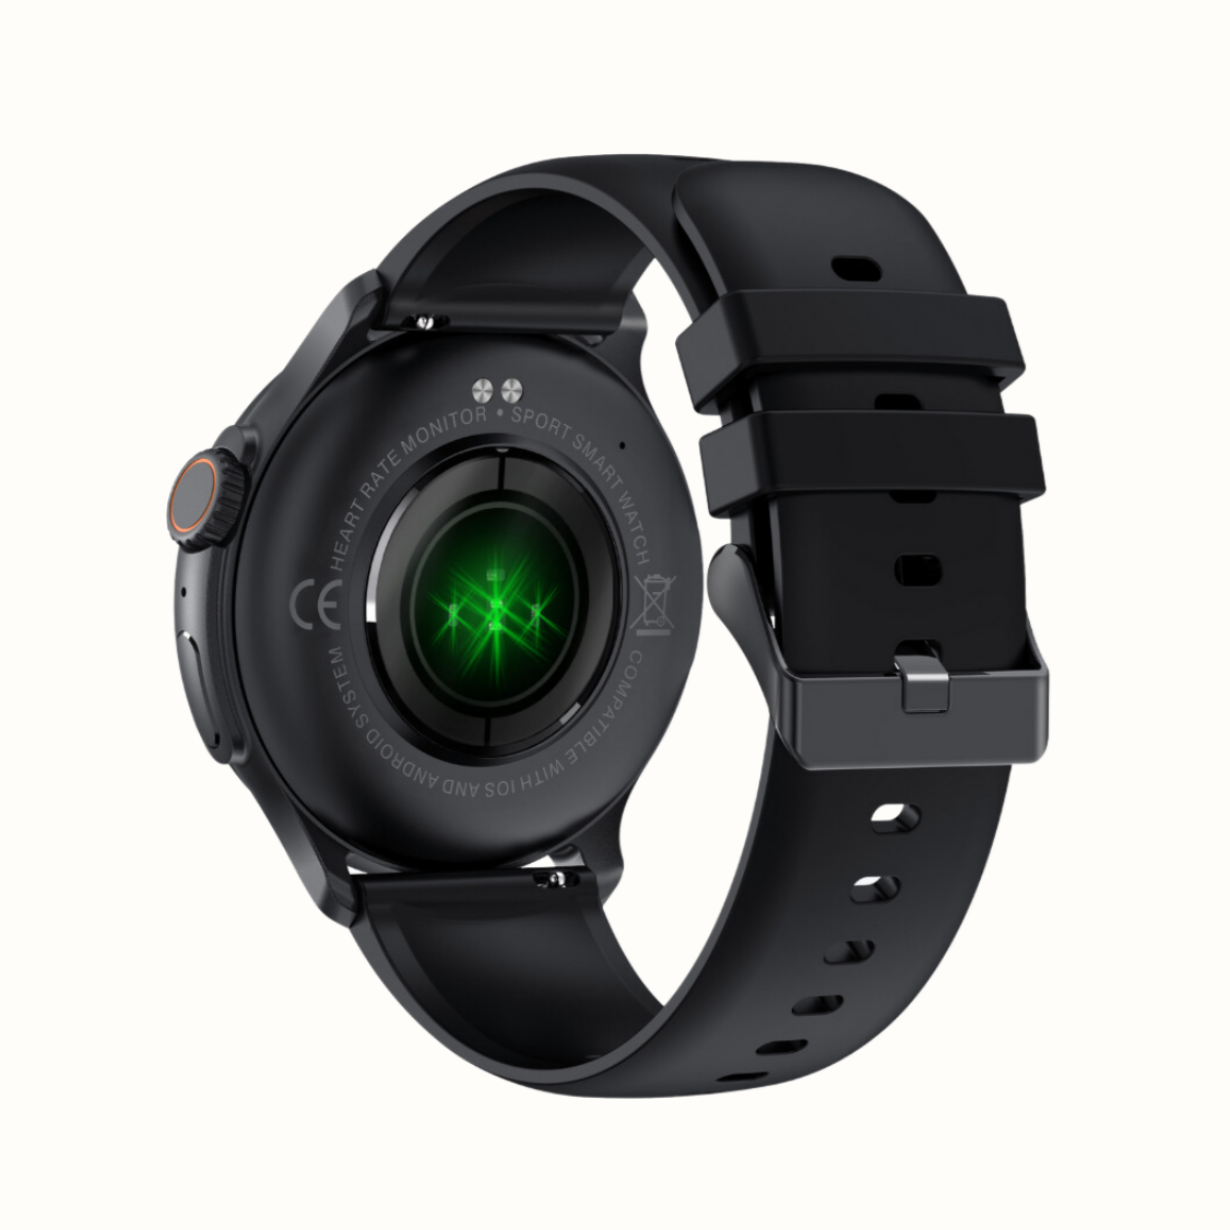 K58 Unisex Smartwatch, AMOLED Display, Setup with Android device, Setup with Apple Device, Water resistance - IP68, Best Smart Watch, 2023, Track Activity,Track WOmens Health, Pedometer, Calorie Monitor, Sleep Tracking, Heart Rate Monitor, Blood Oxygen Monitor- Spo2, Multisport Mode, Color- Black